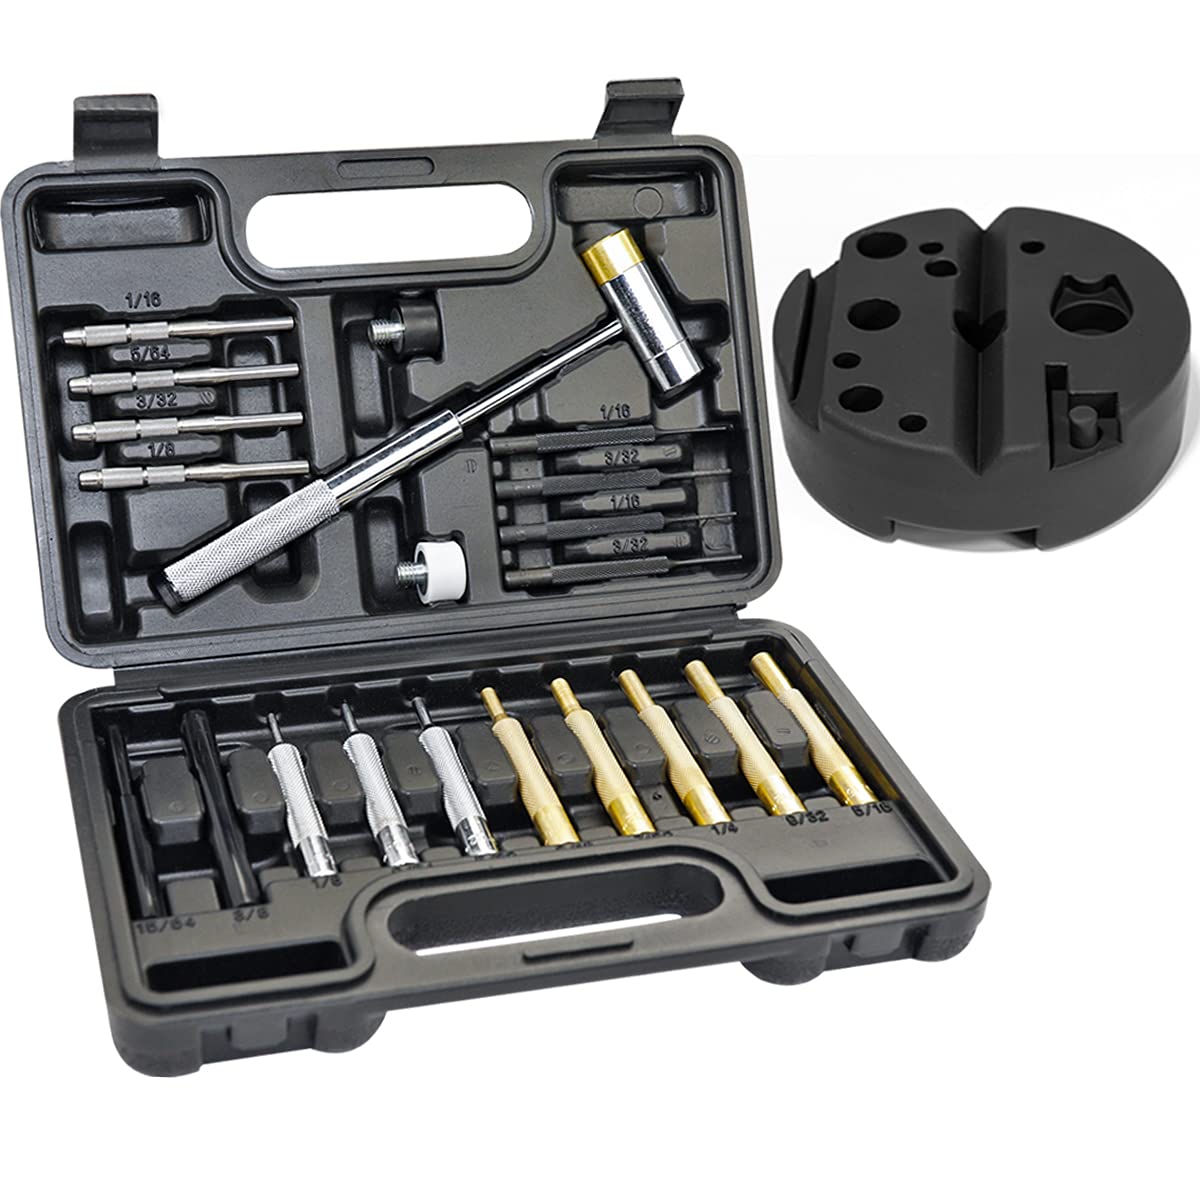 Bestnule Punch Set, Punch Tools, Roll Pin Punch Set, Made Of Solid Material Including Steel Punch And Hammer, Ideal For Machiner